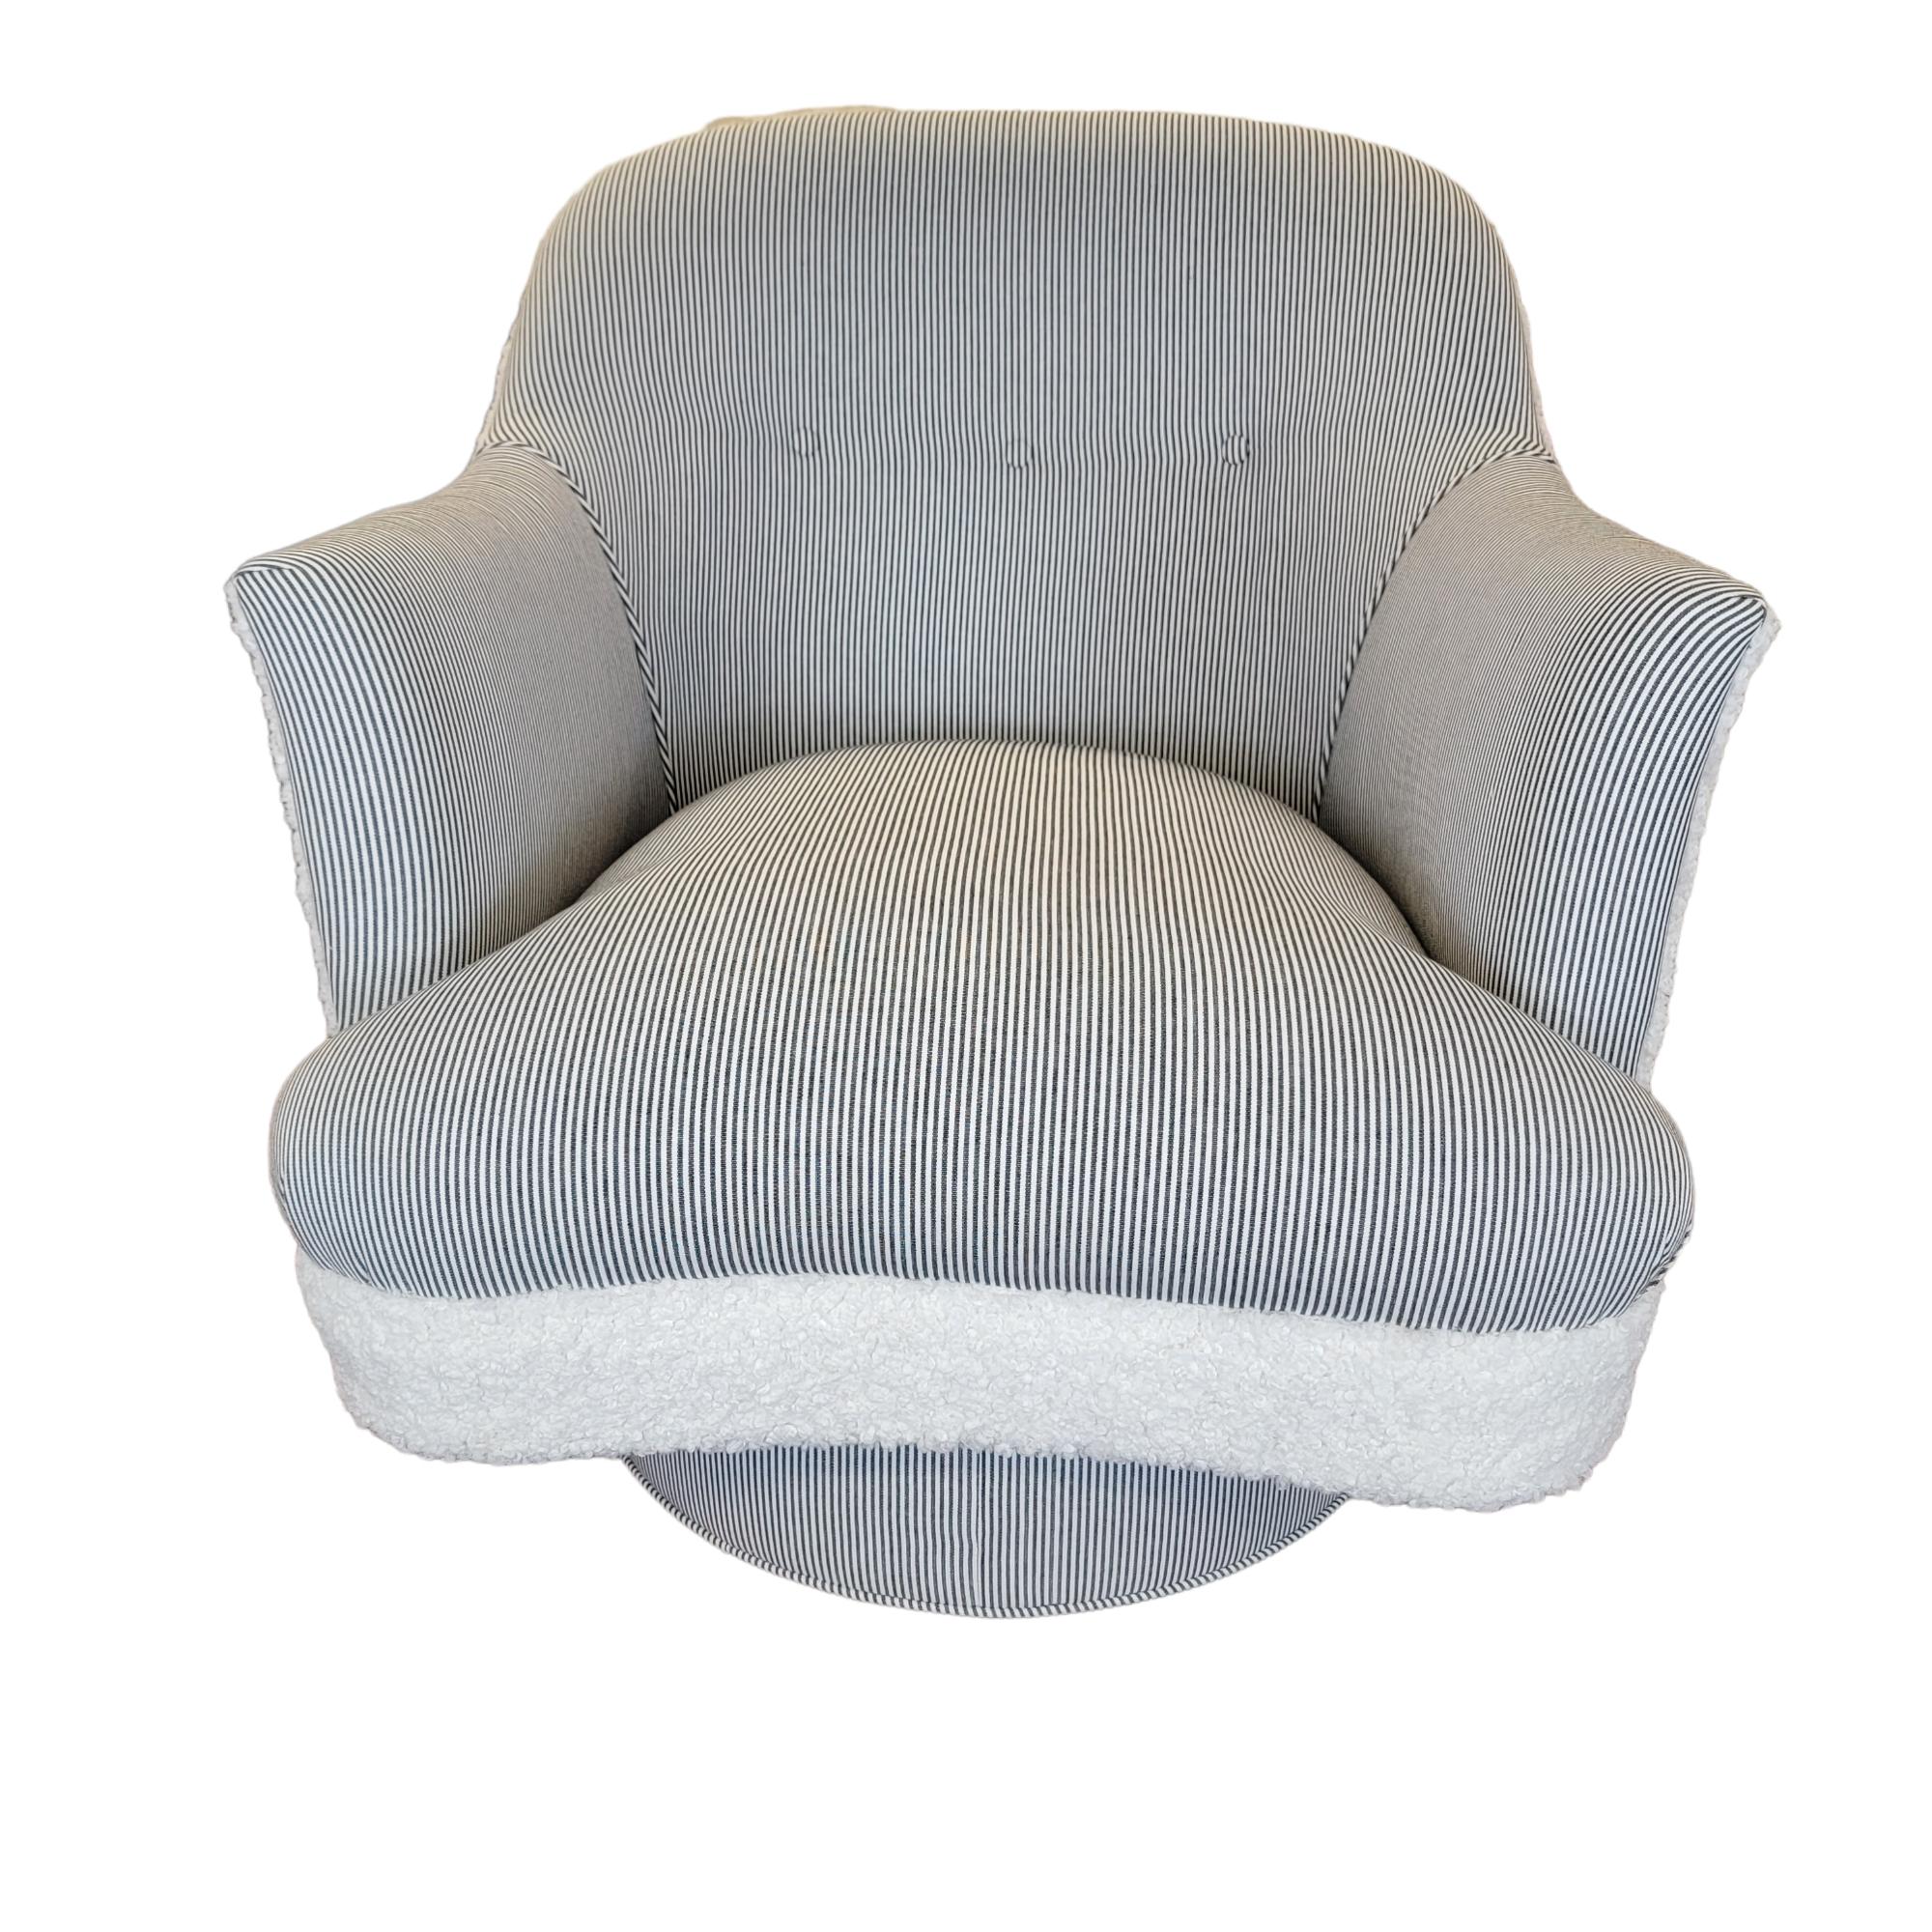 Generously sized swivel chair by Drexel with firm back support and tight cushion newly reupholstered in ticking and faux shearling. There is no loose cushion. Attractive 'serpentine' curve seat showcases the front elegantly. Ideal seating for